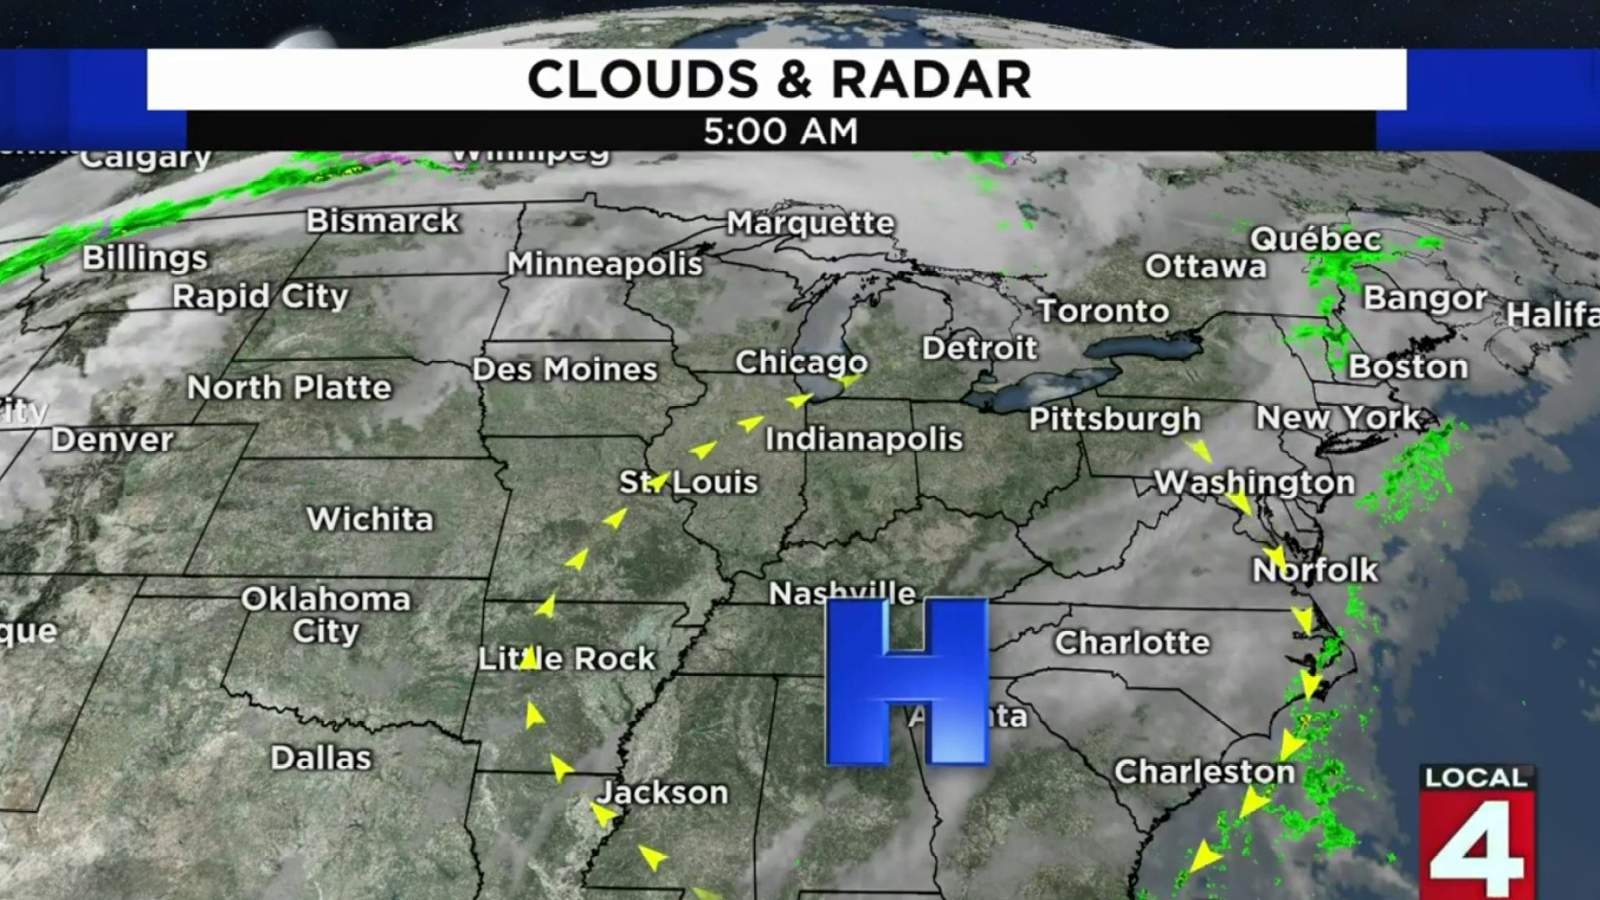 Metro Detroit weather: Tons of sun with highs in the upper 60s